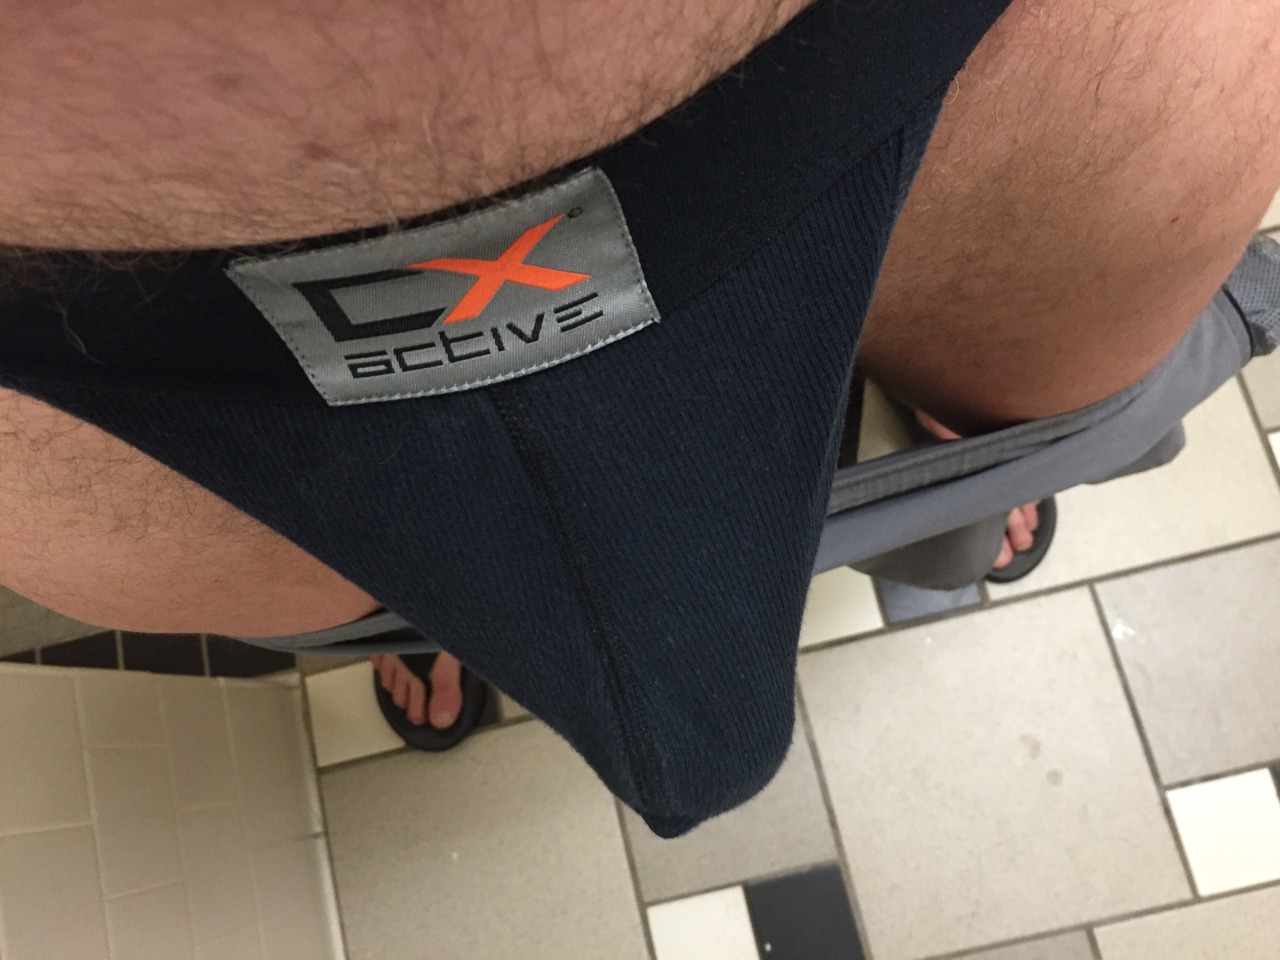 stmax51:  Sweaty jock coming off after the workout. Time to get my ass into the shower